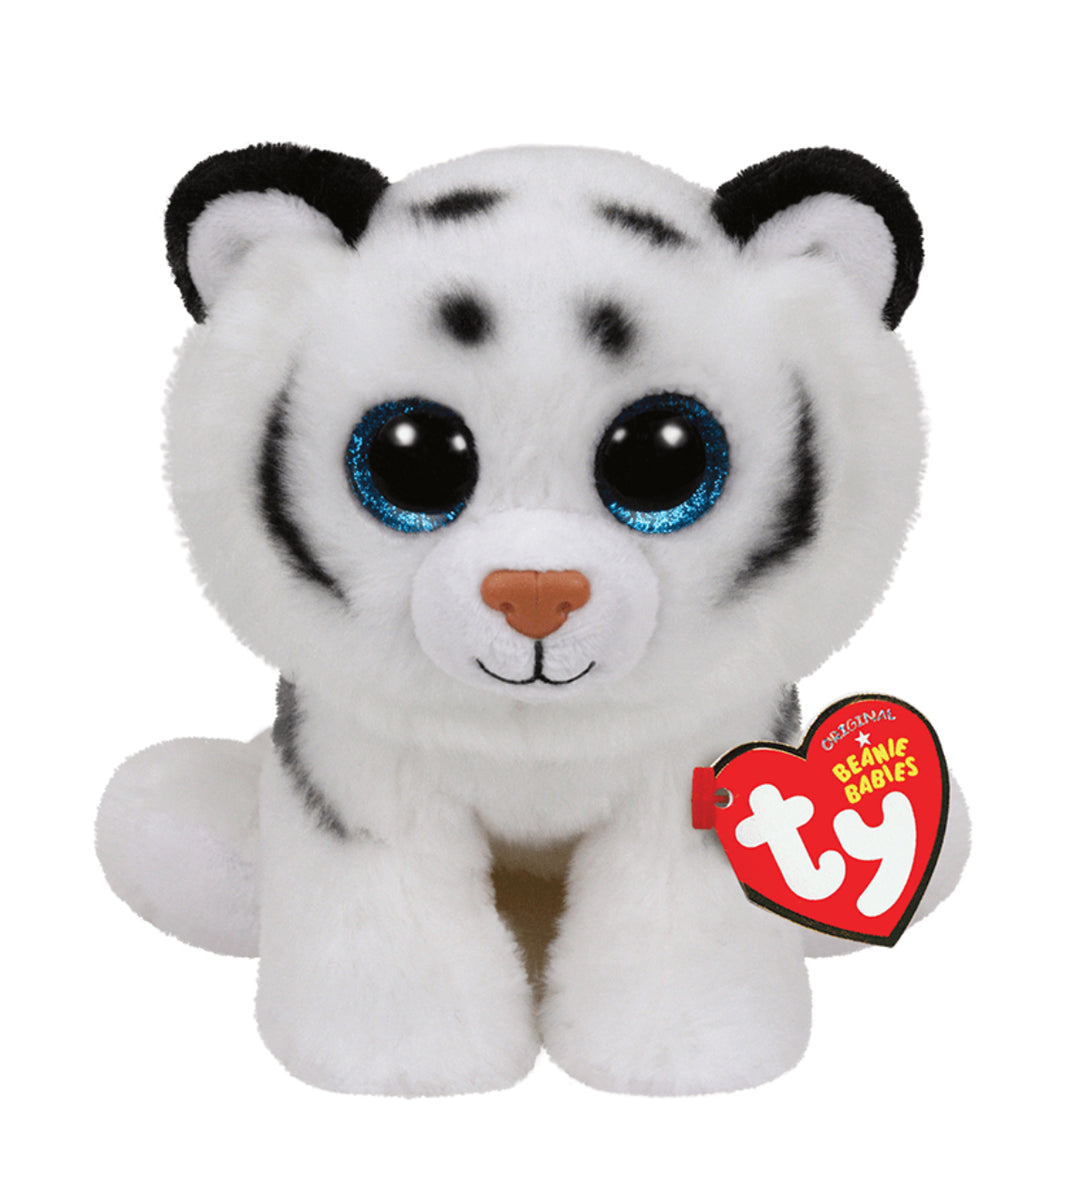 TY Beanie Boos Stuffed Animal, Tundra-240 Kids-Inspired by Justeen-Women's Clothing Boutique in Chicago, Illinois